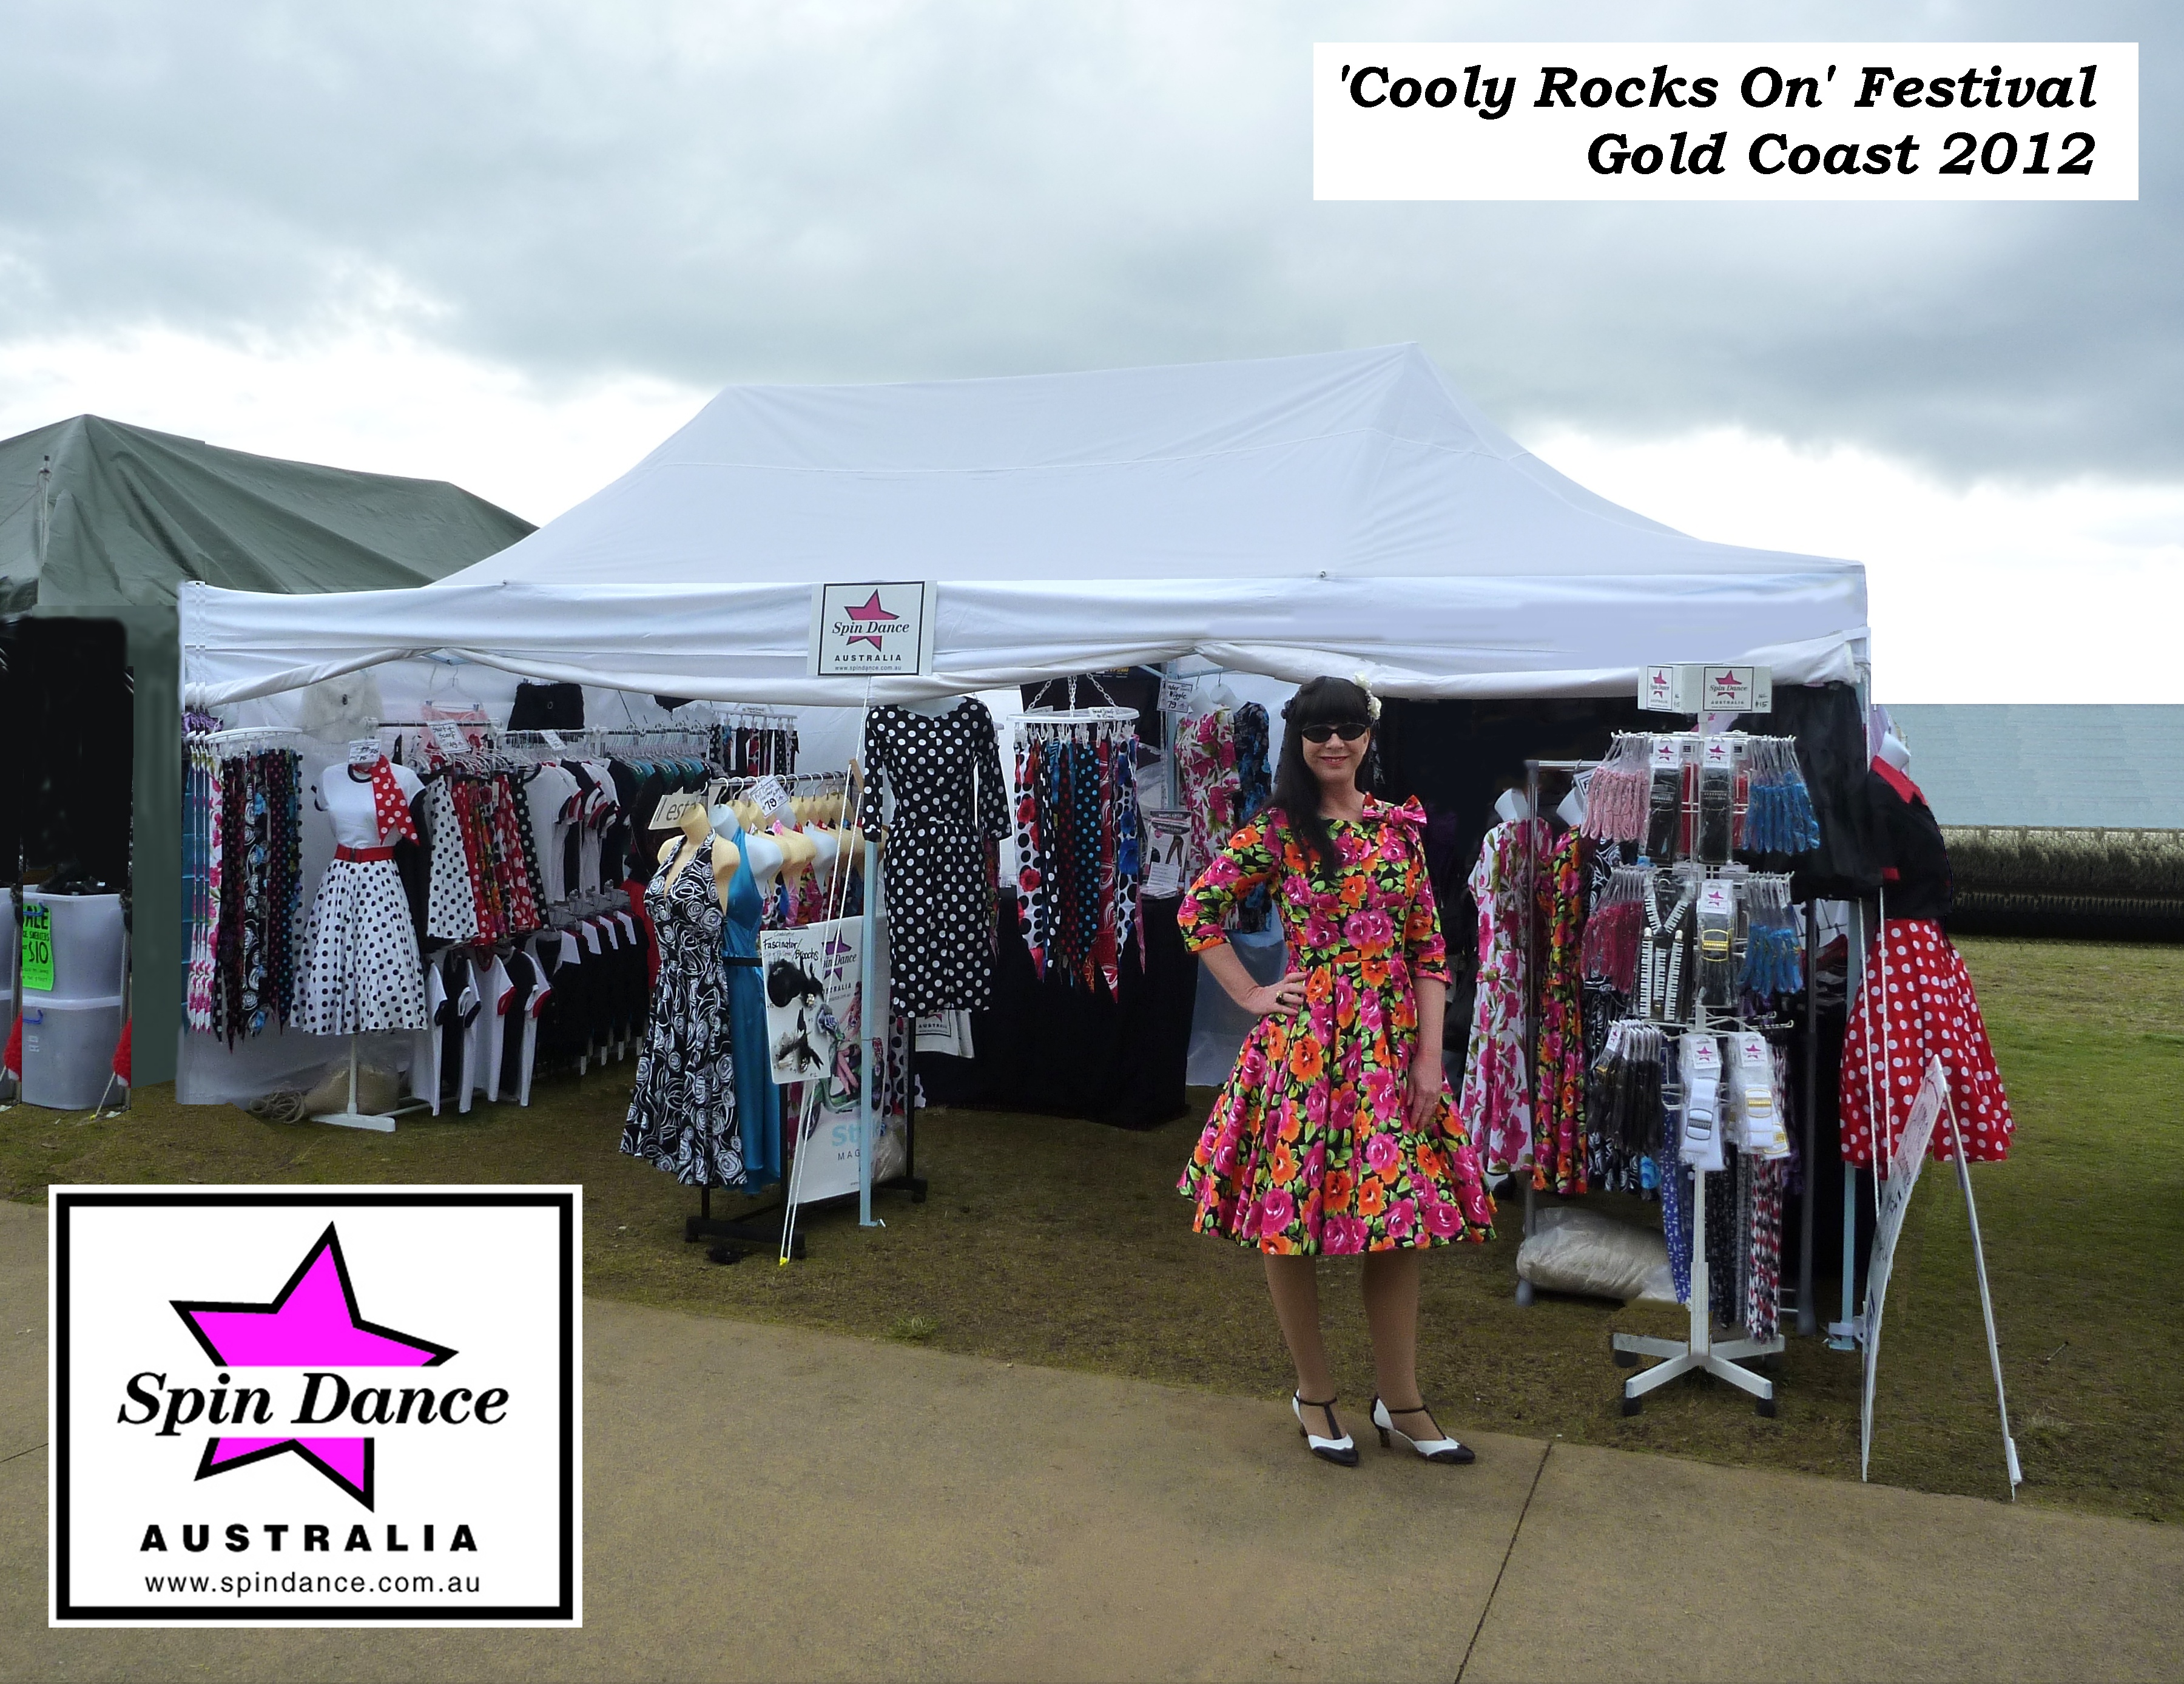 1950s Fashion at Cooly Rocks Festival Gold Coast